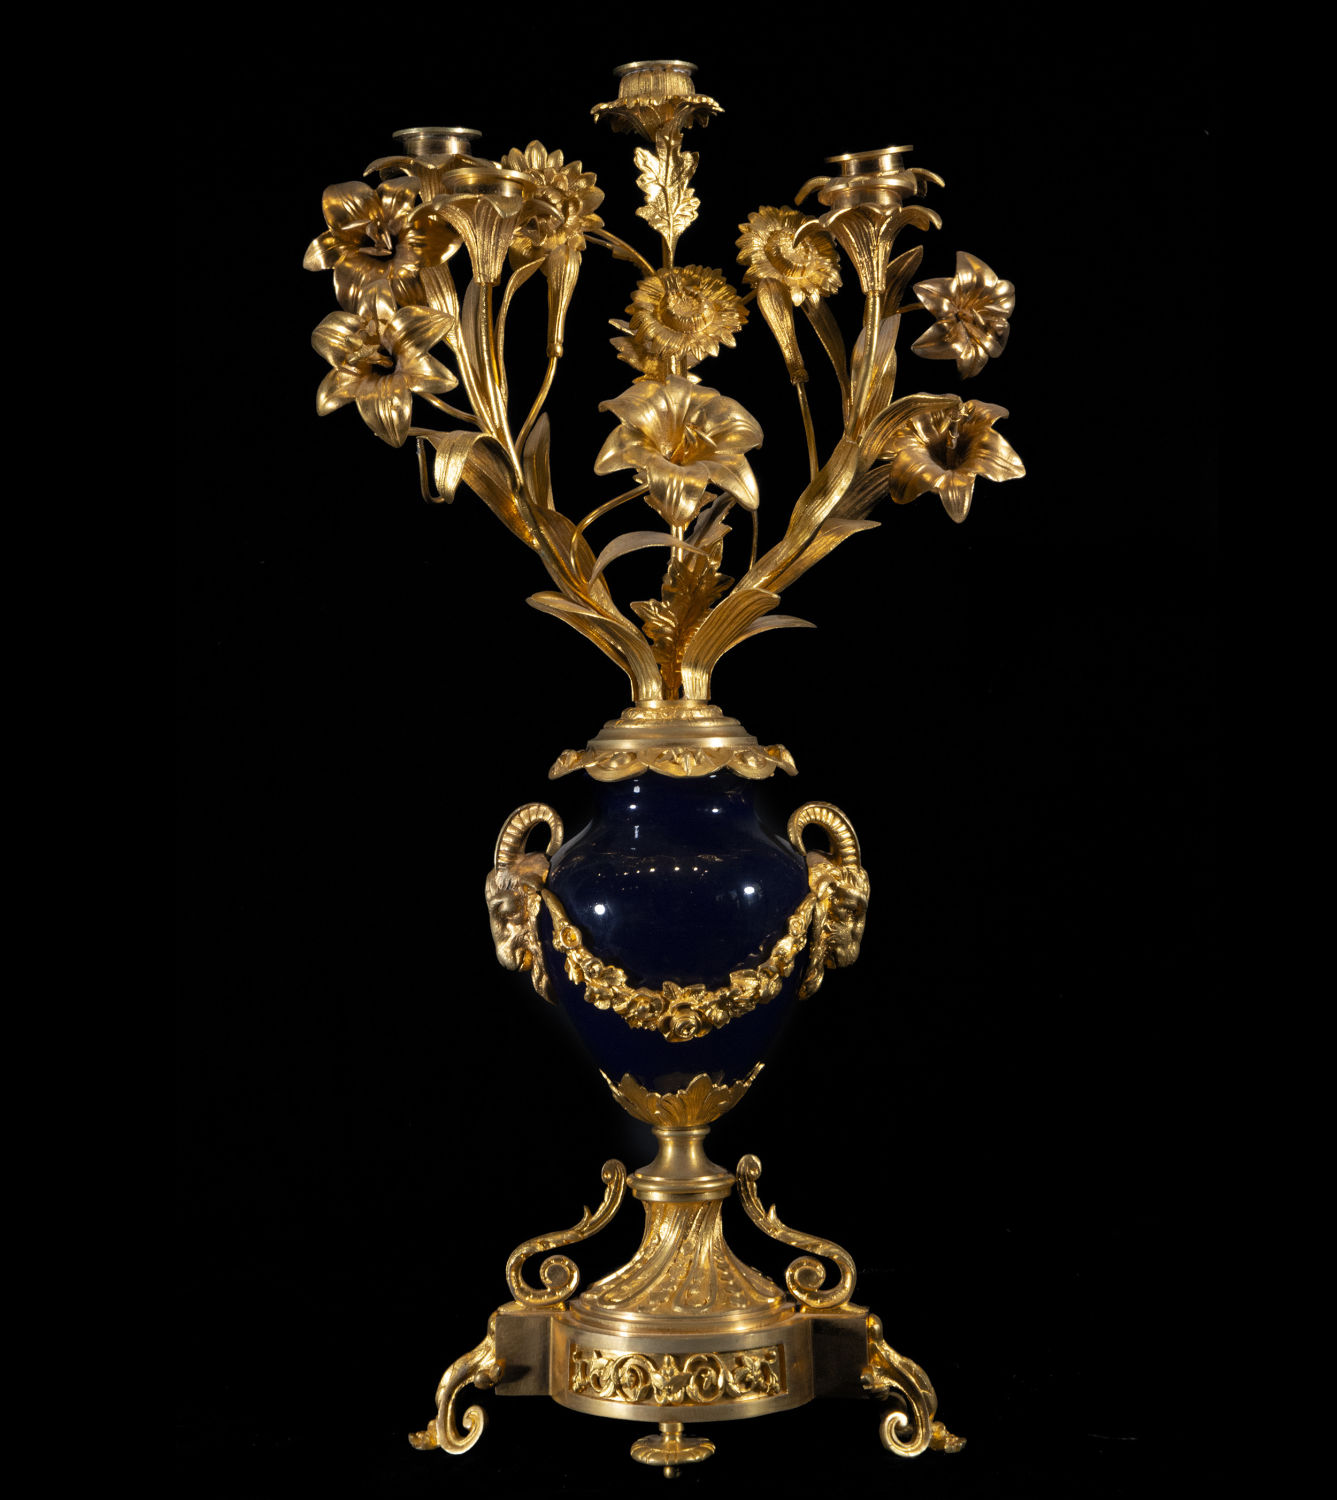 Elegant and Large Table Clock with French Sèvres Porcelain Garnish "Bleu Royale" Napoleon III of the - Image 9 of 12